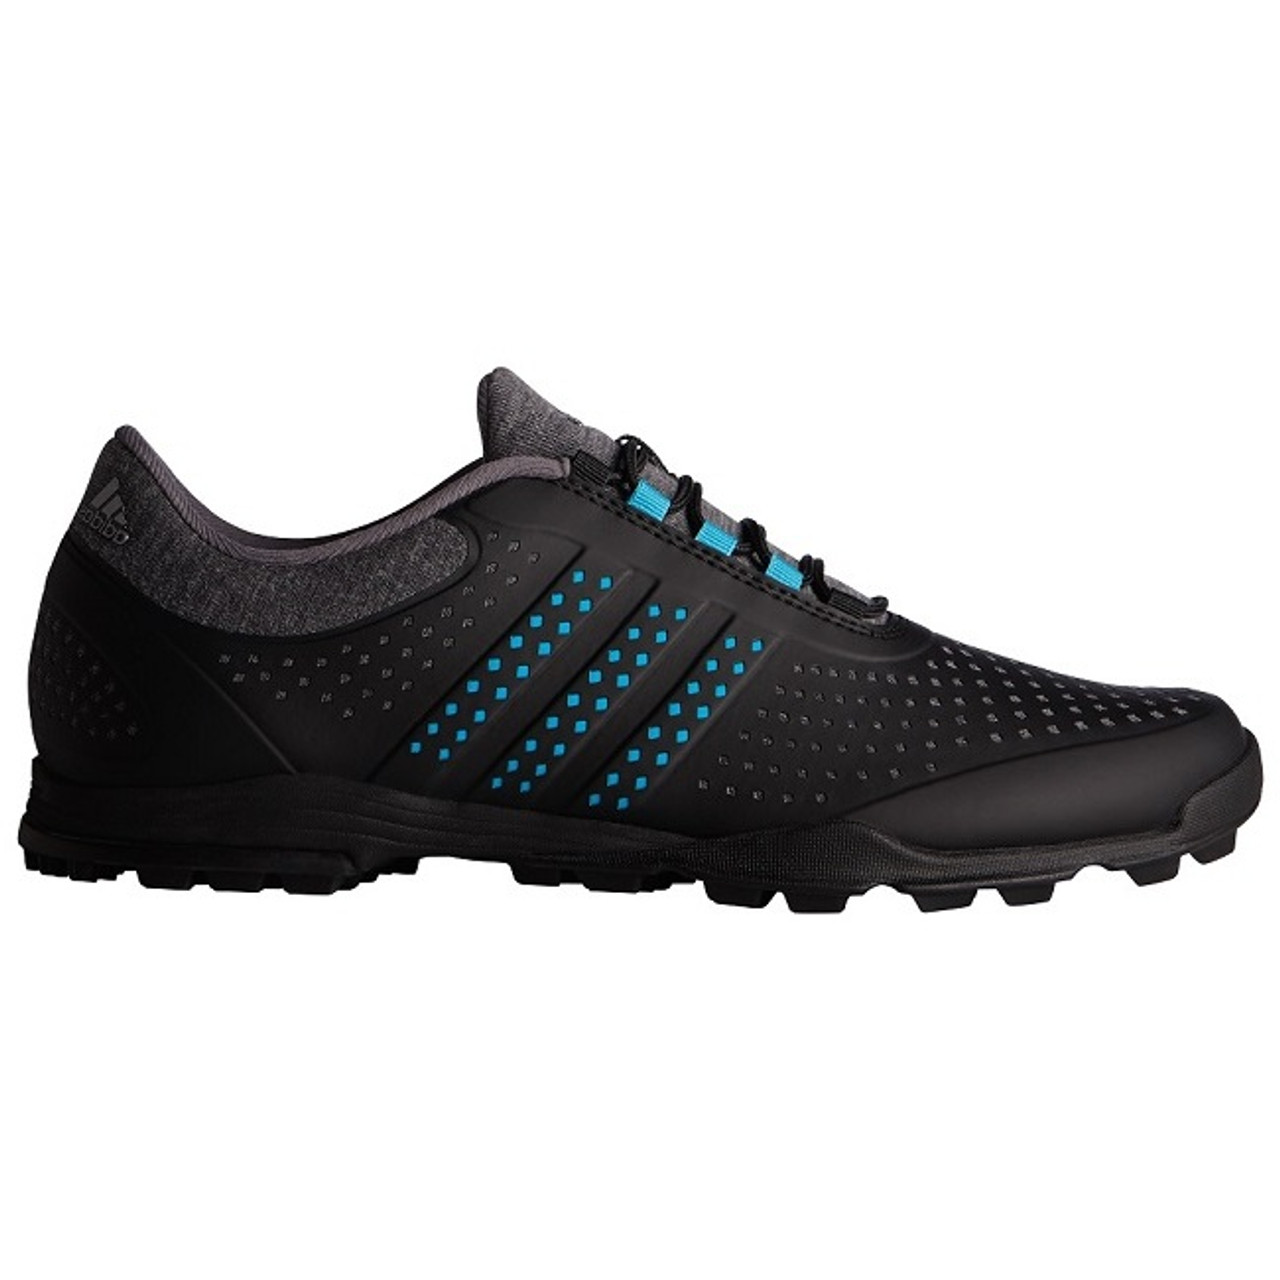 womens adidas golf shoes clearance